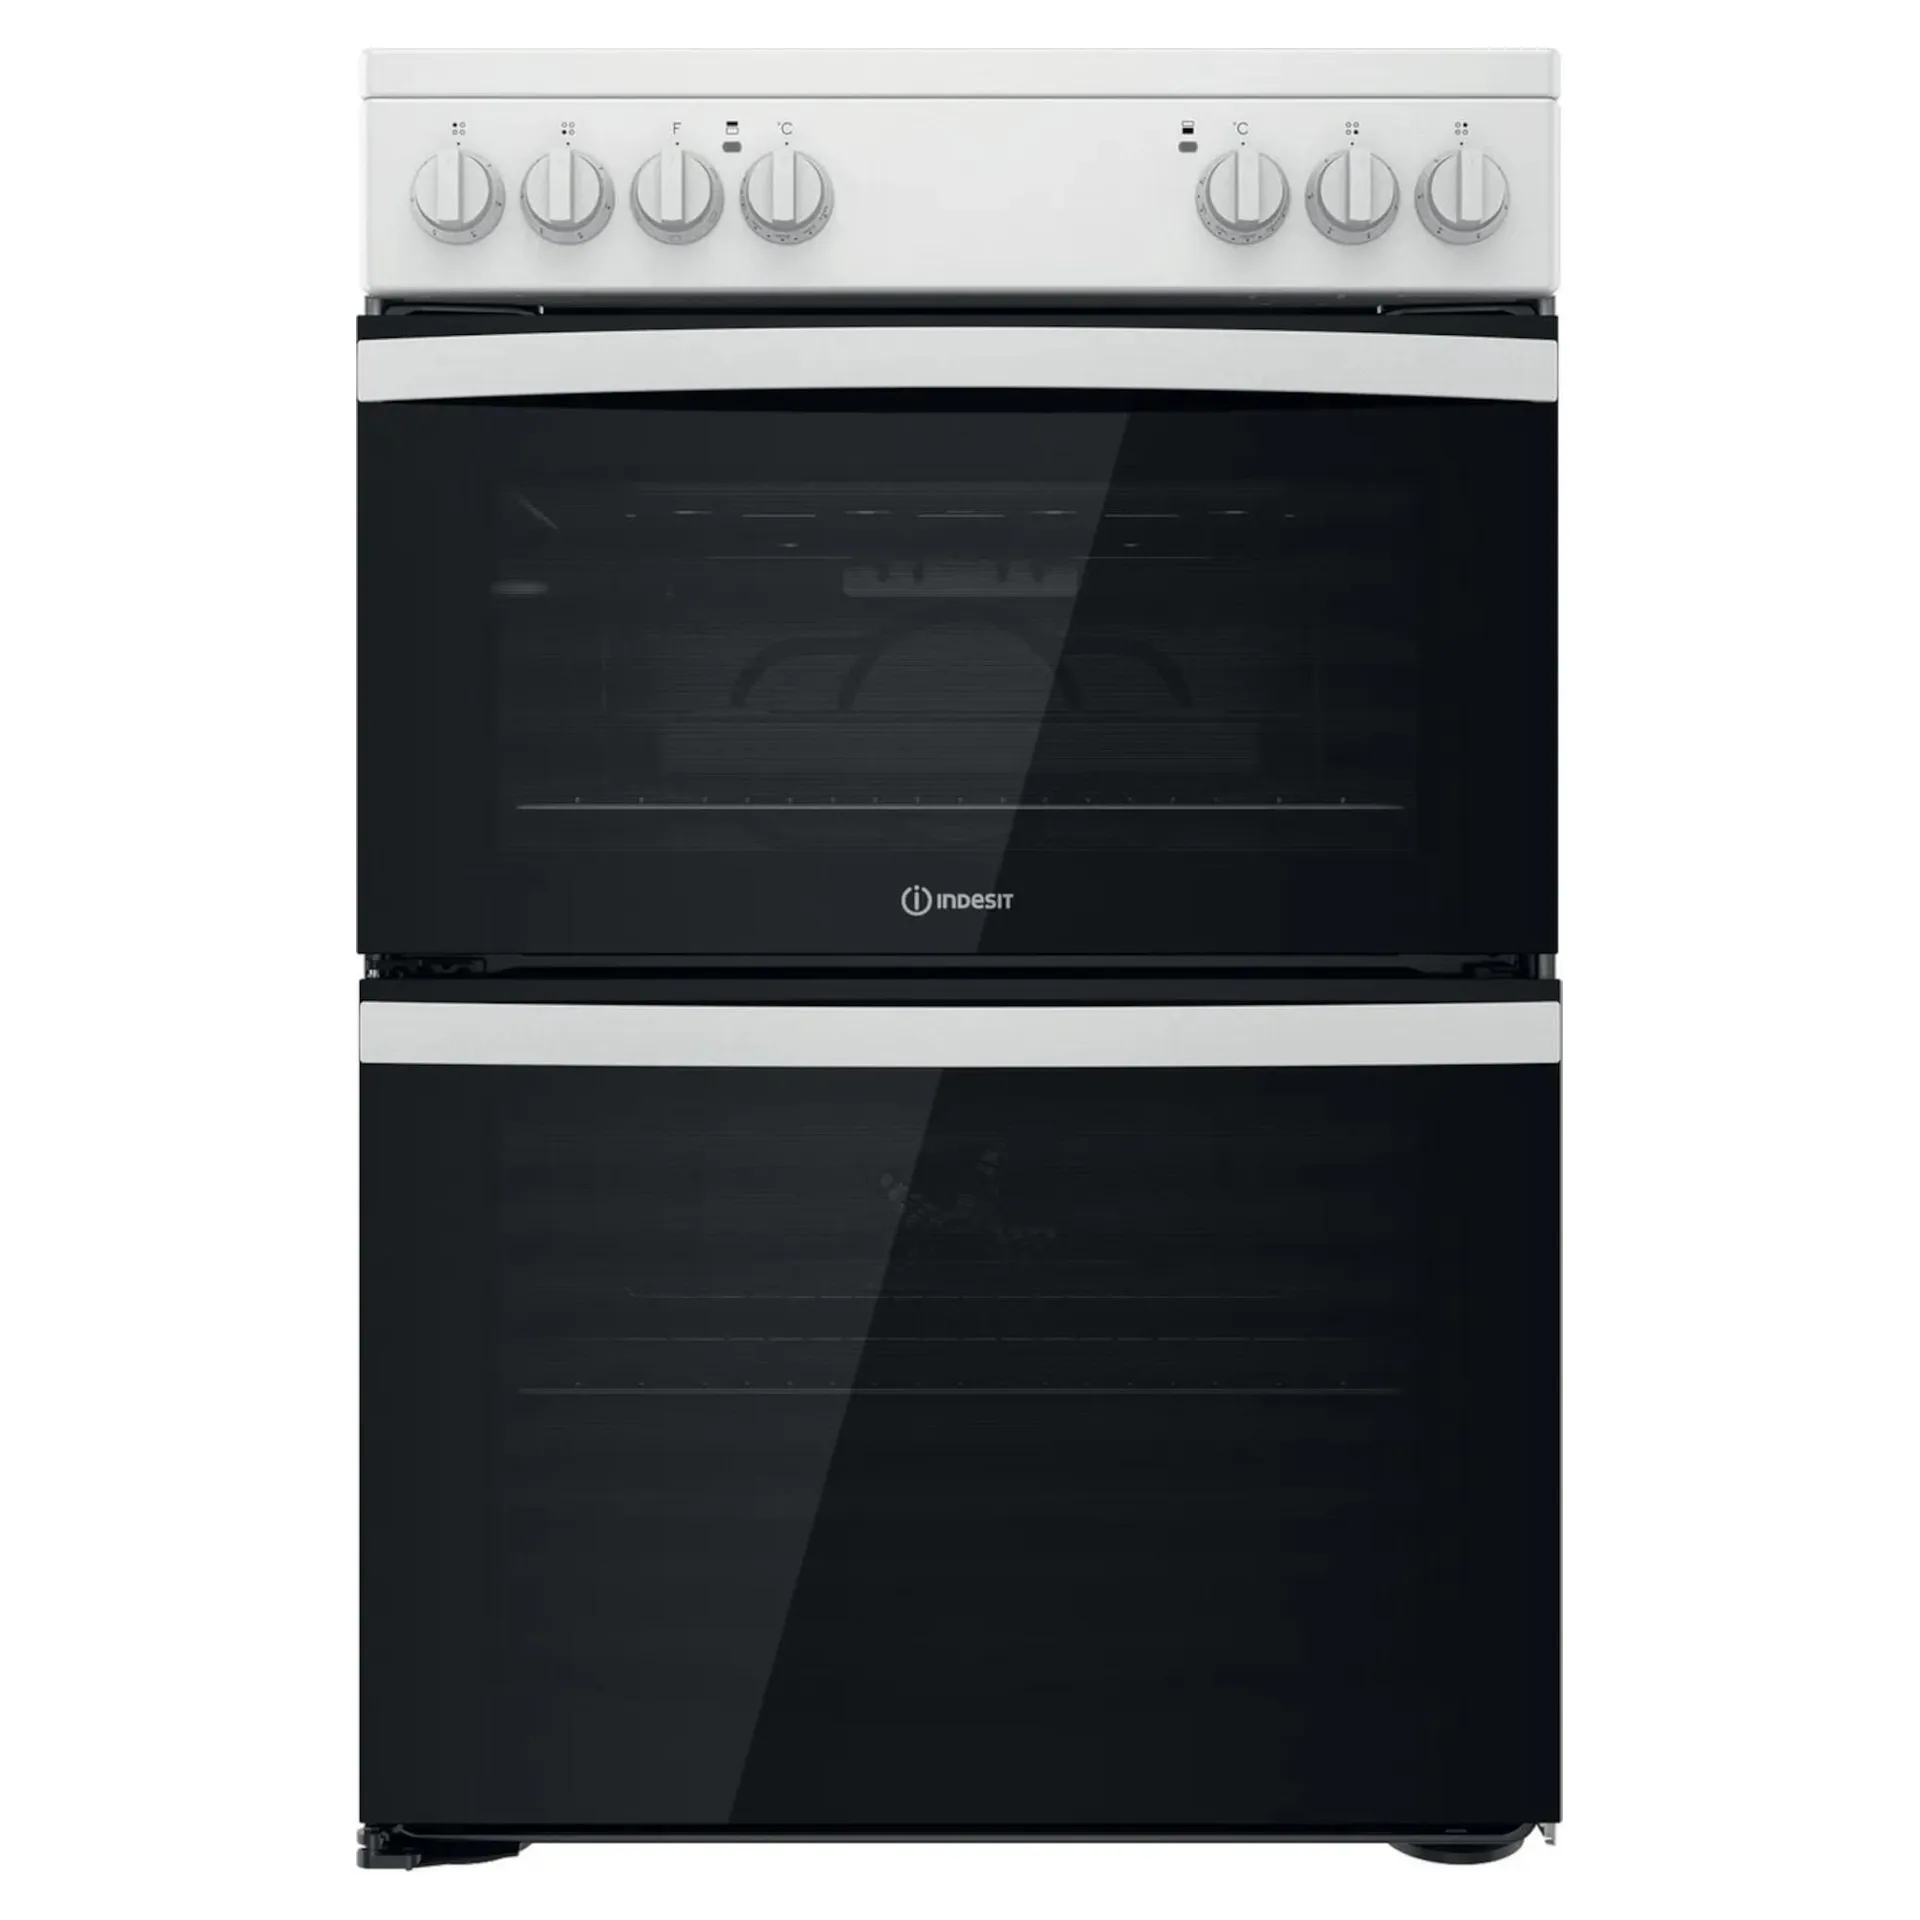 ID67V9KMWUK Electric Cooker with Ceramic Hob